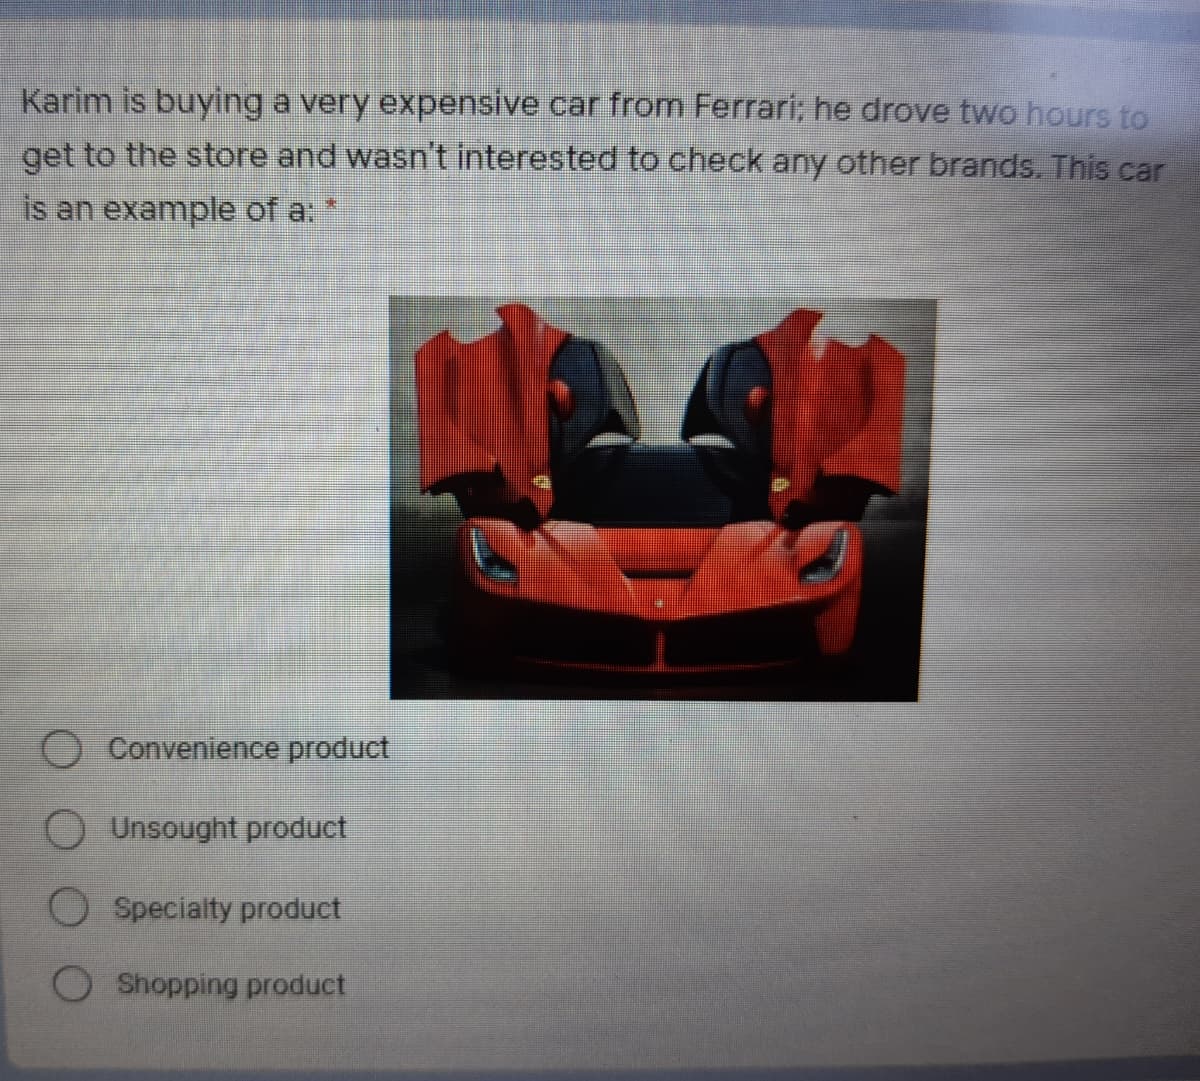 Karim is buying a very expensive car from Ferrari; he drove two hours to
get to the store and wasn't interested to check any other brands. This car
is an example of a:
Convenience product
Unsought product
O Specialty product
Shopping product
